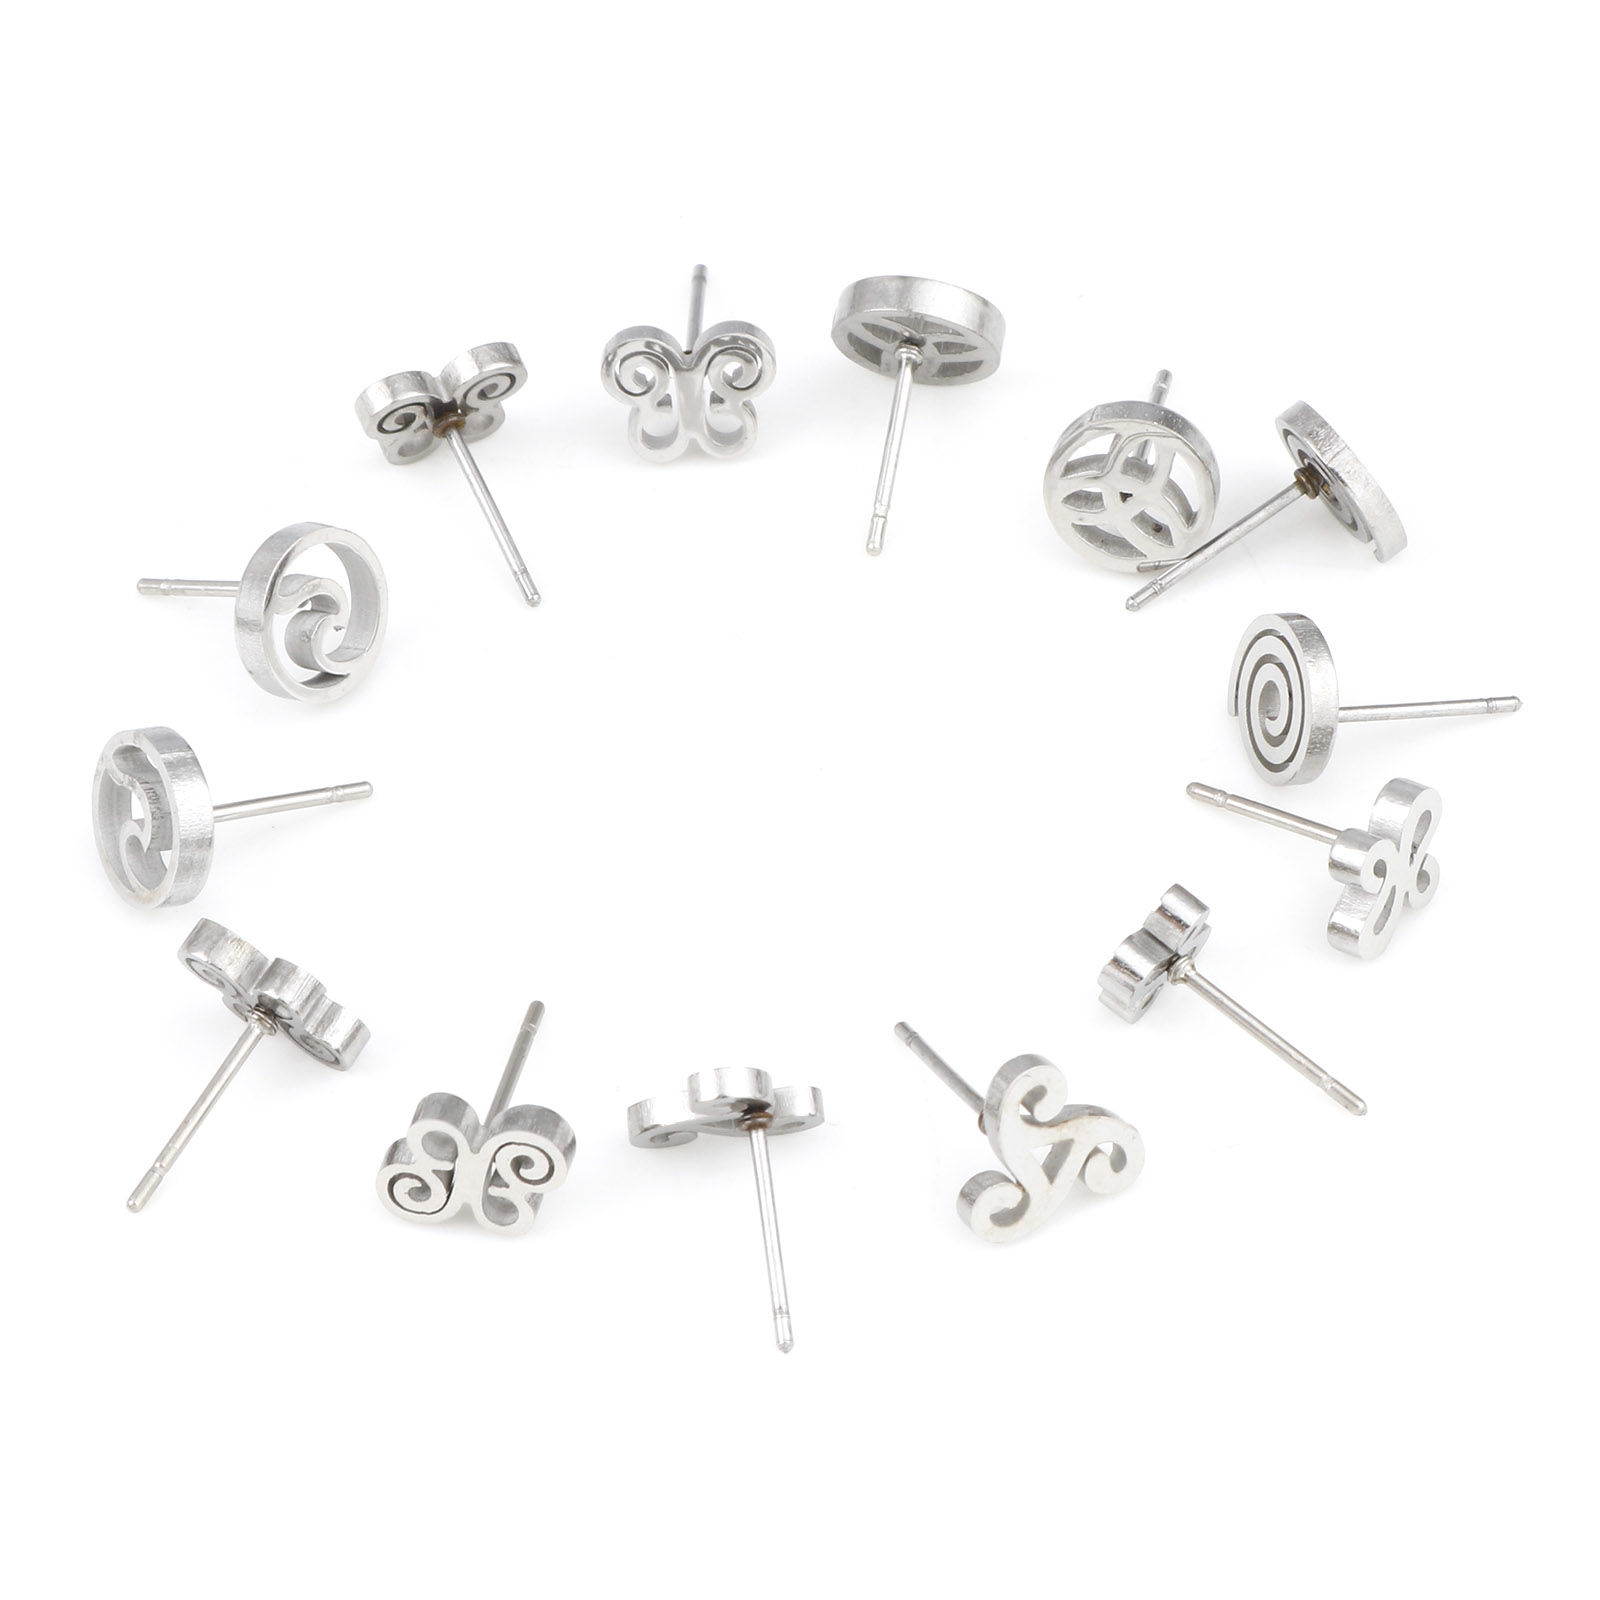 Picture of Stainless Steel Religious Ear Post Stud Earrings Silver Tone Butterfly Animal Hollow Post/ Wire Size: (20 gauge), 6 Pairs